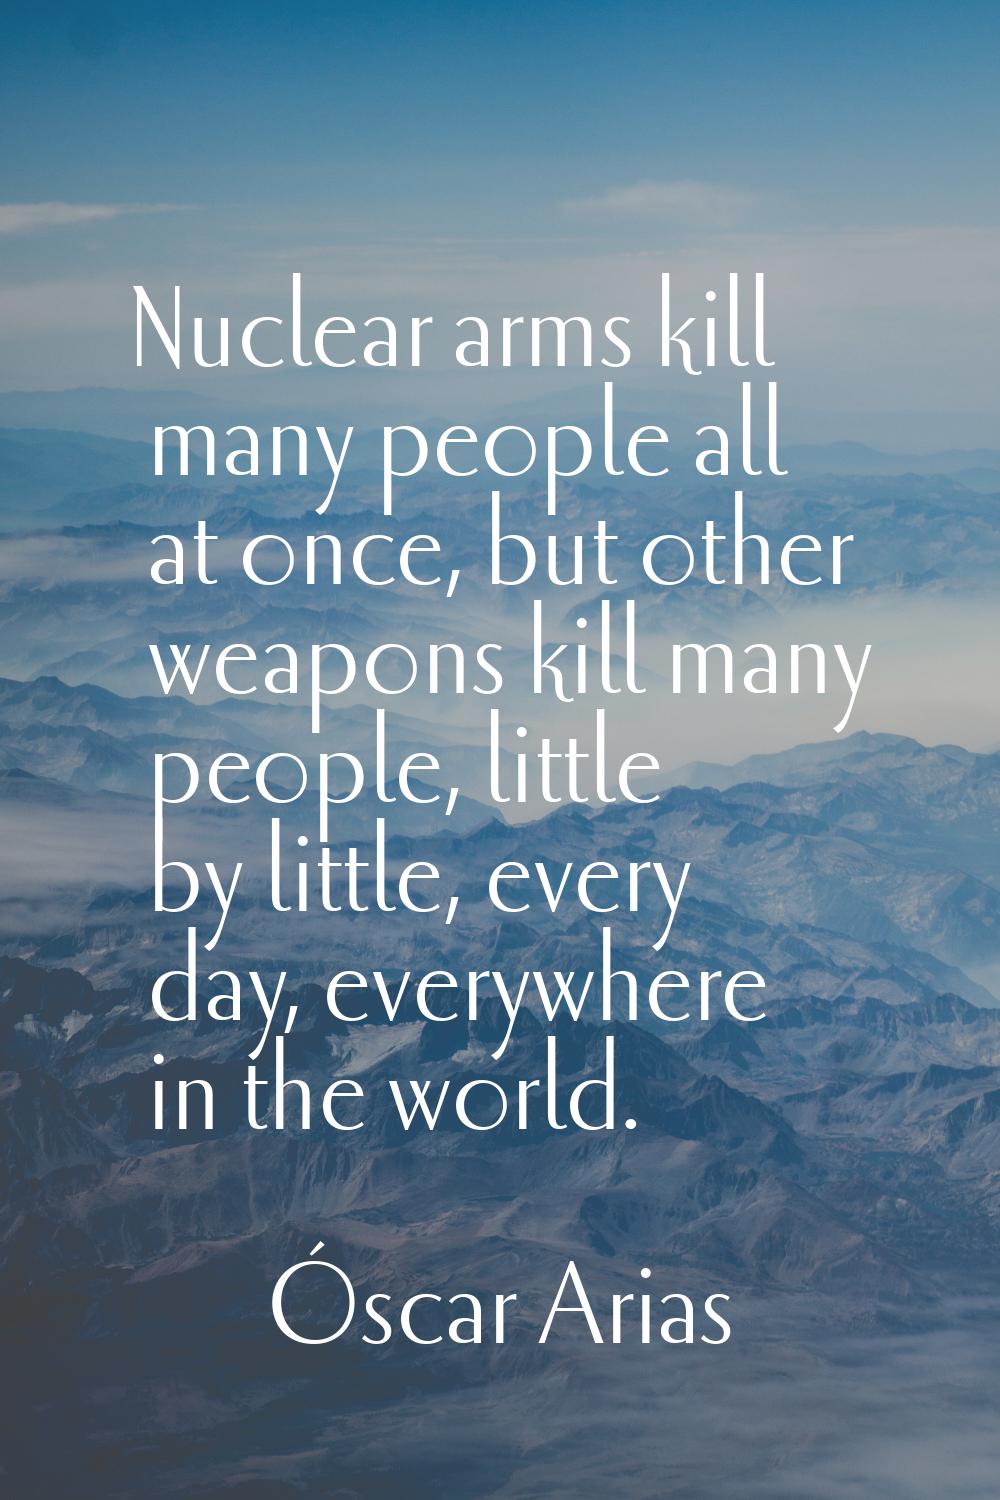 Nuclear arms kill many people all at once, but other weapons kill many people, little by little, ev